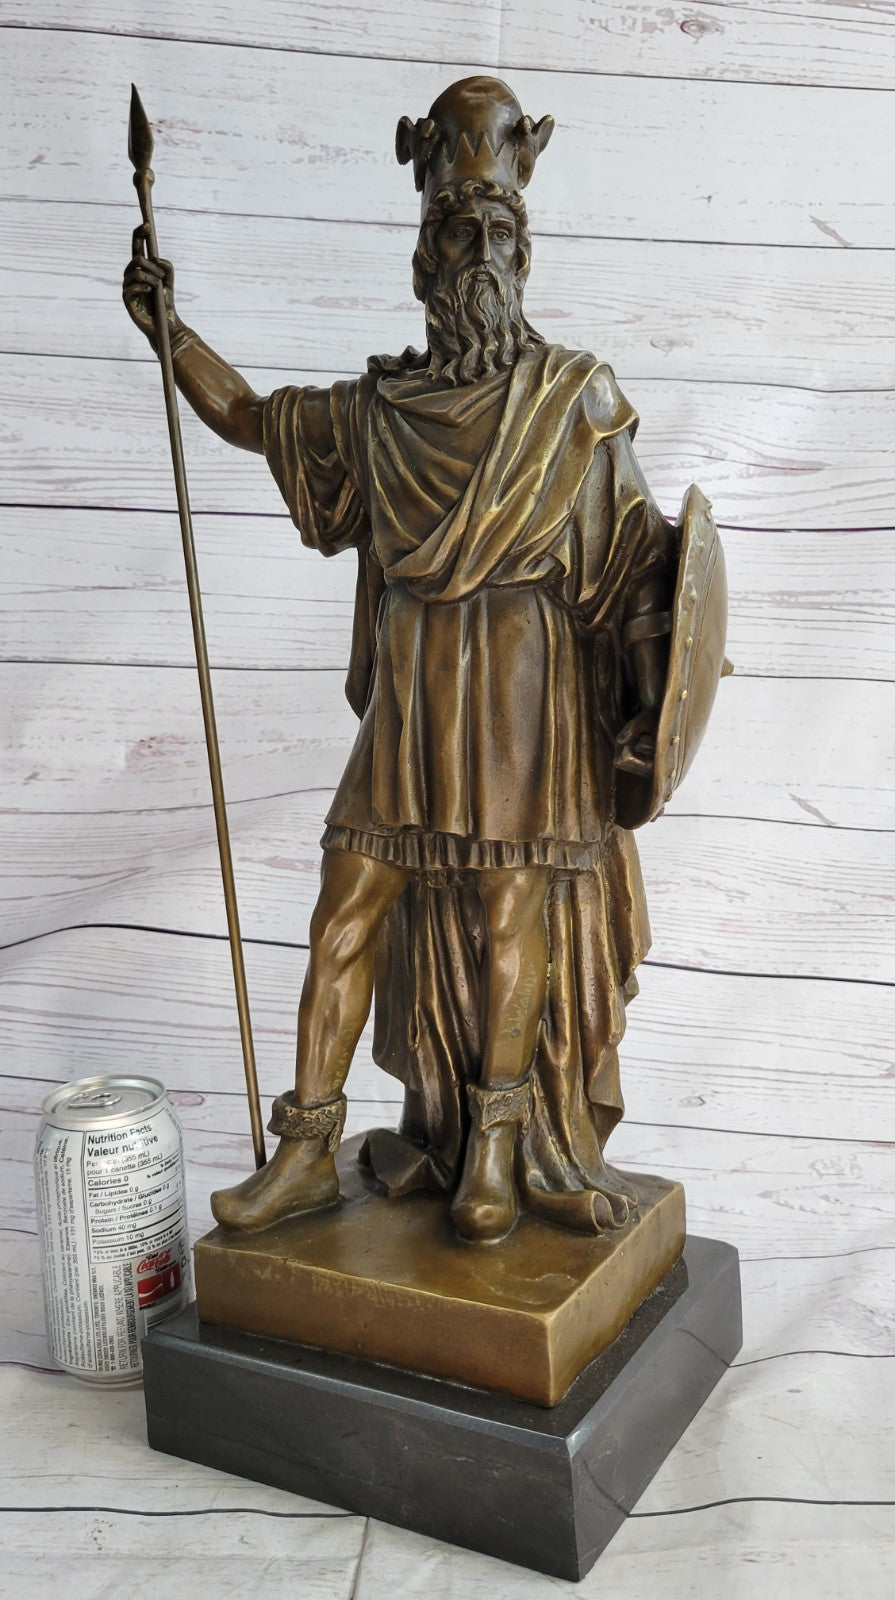 Handcrafted bronze sculpture SALE Warrior" Persia Of King Stunning 21" Tall Decor